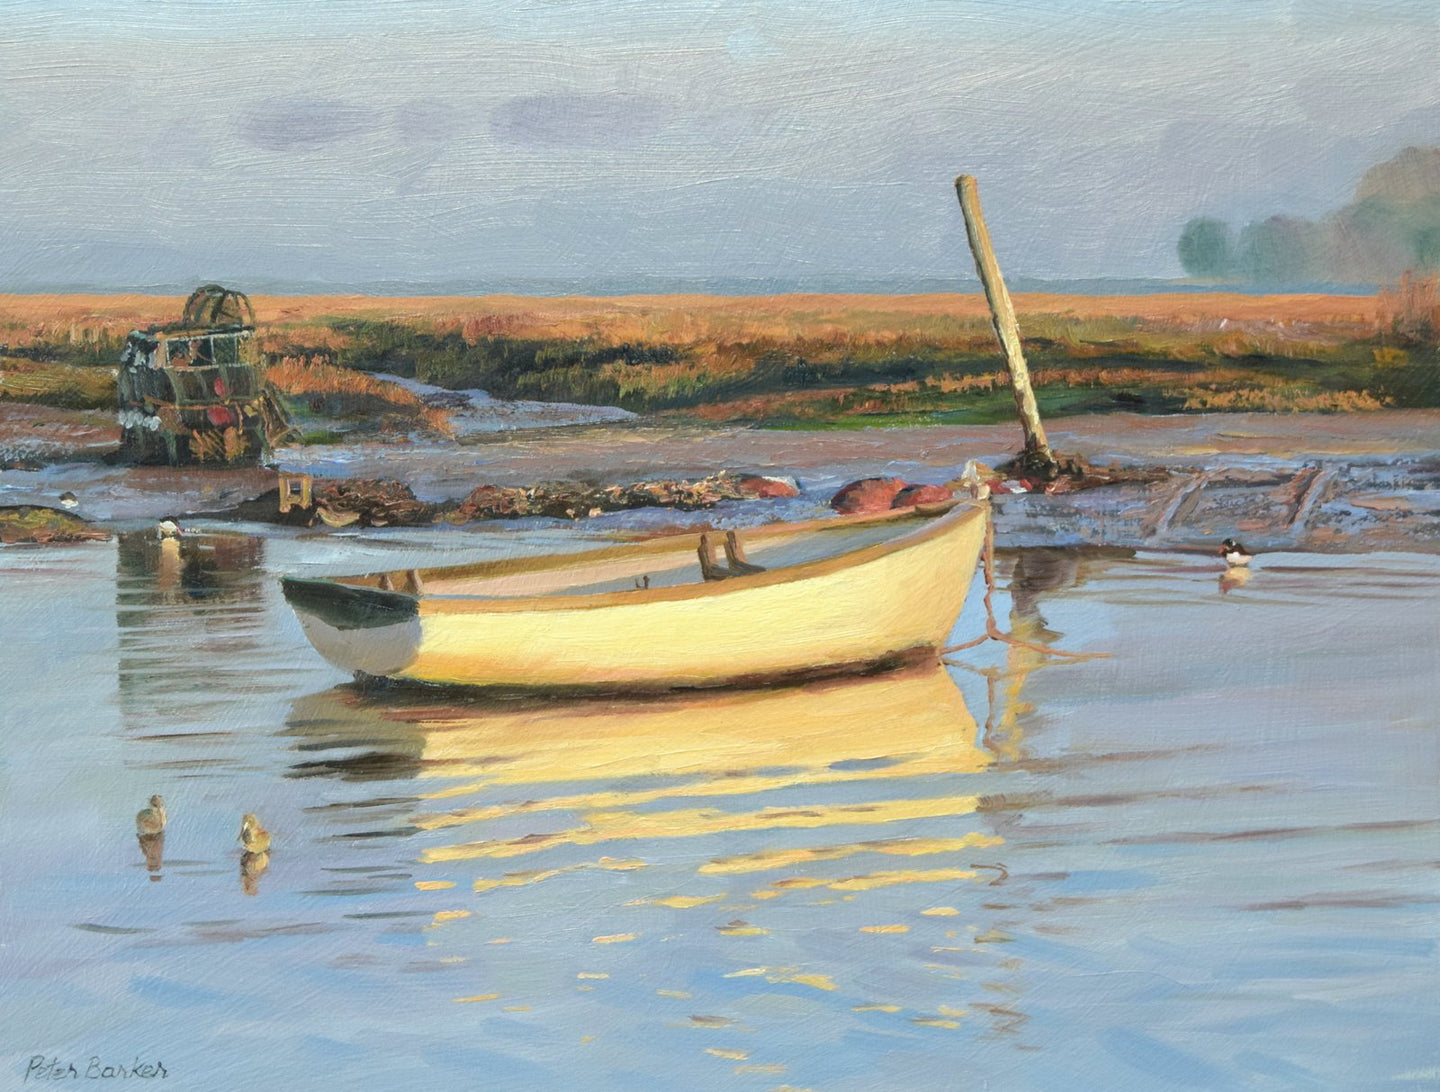 9 x 12 inch oil painting of a white-hulled boat on the water, glowing yellow in the late Winter sunshine, with a high horizon.